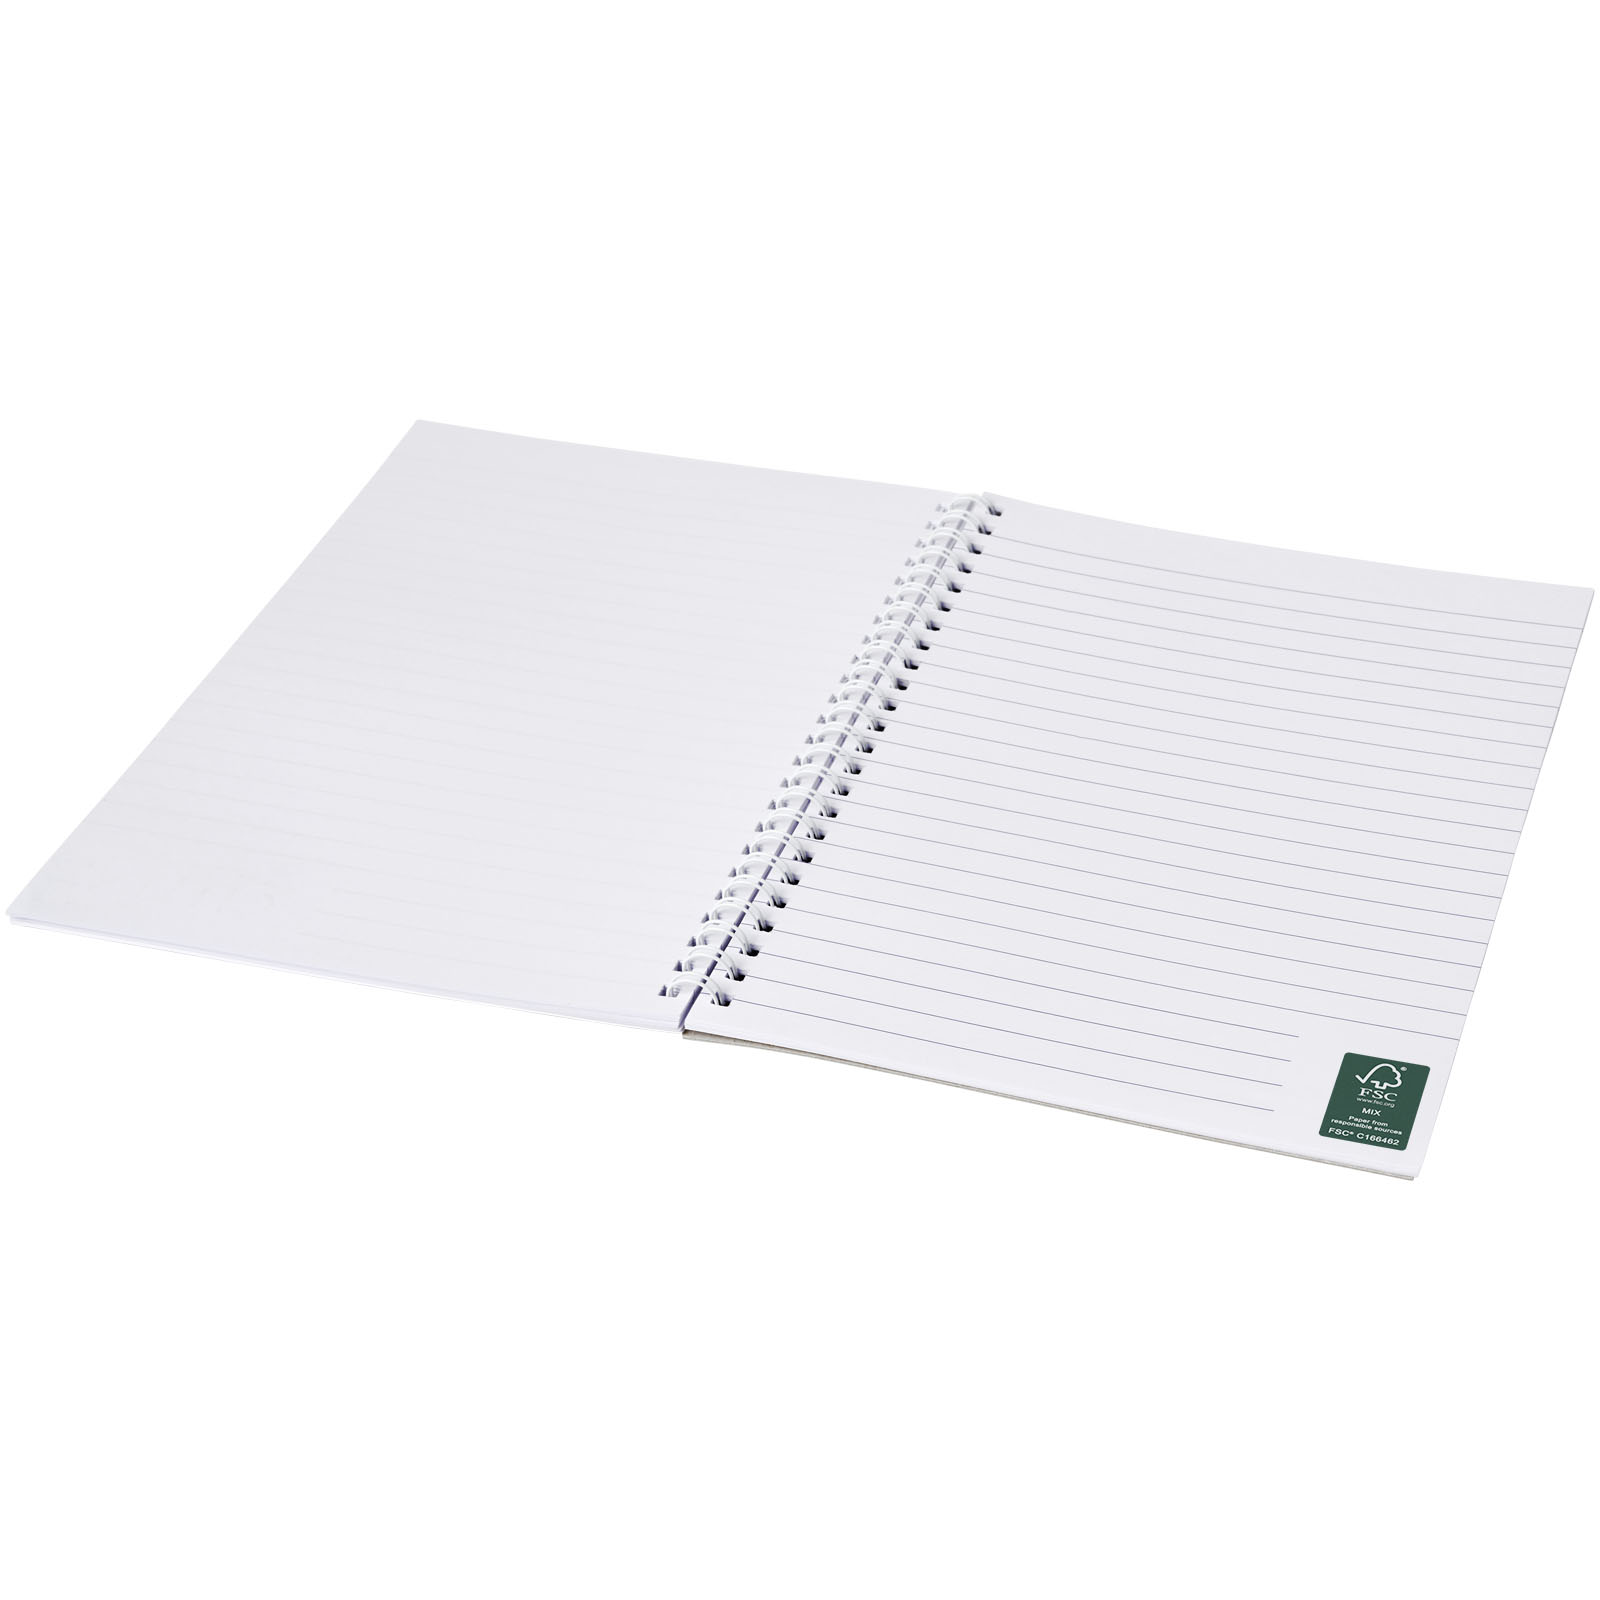 Advertising Soft cover notebooks - Desk-Mate® A5 spiral notebook with printed back cover - 3